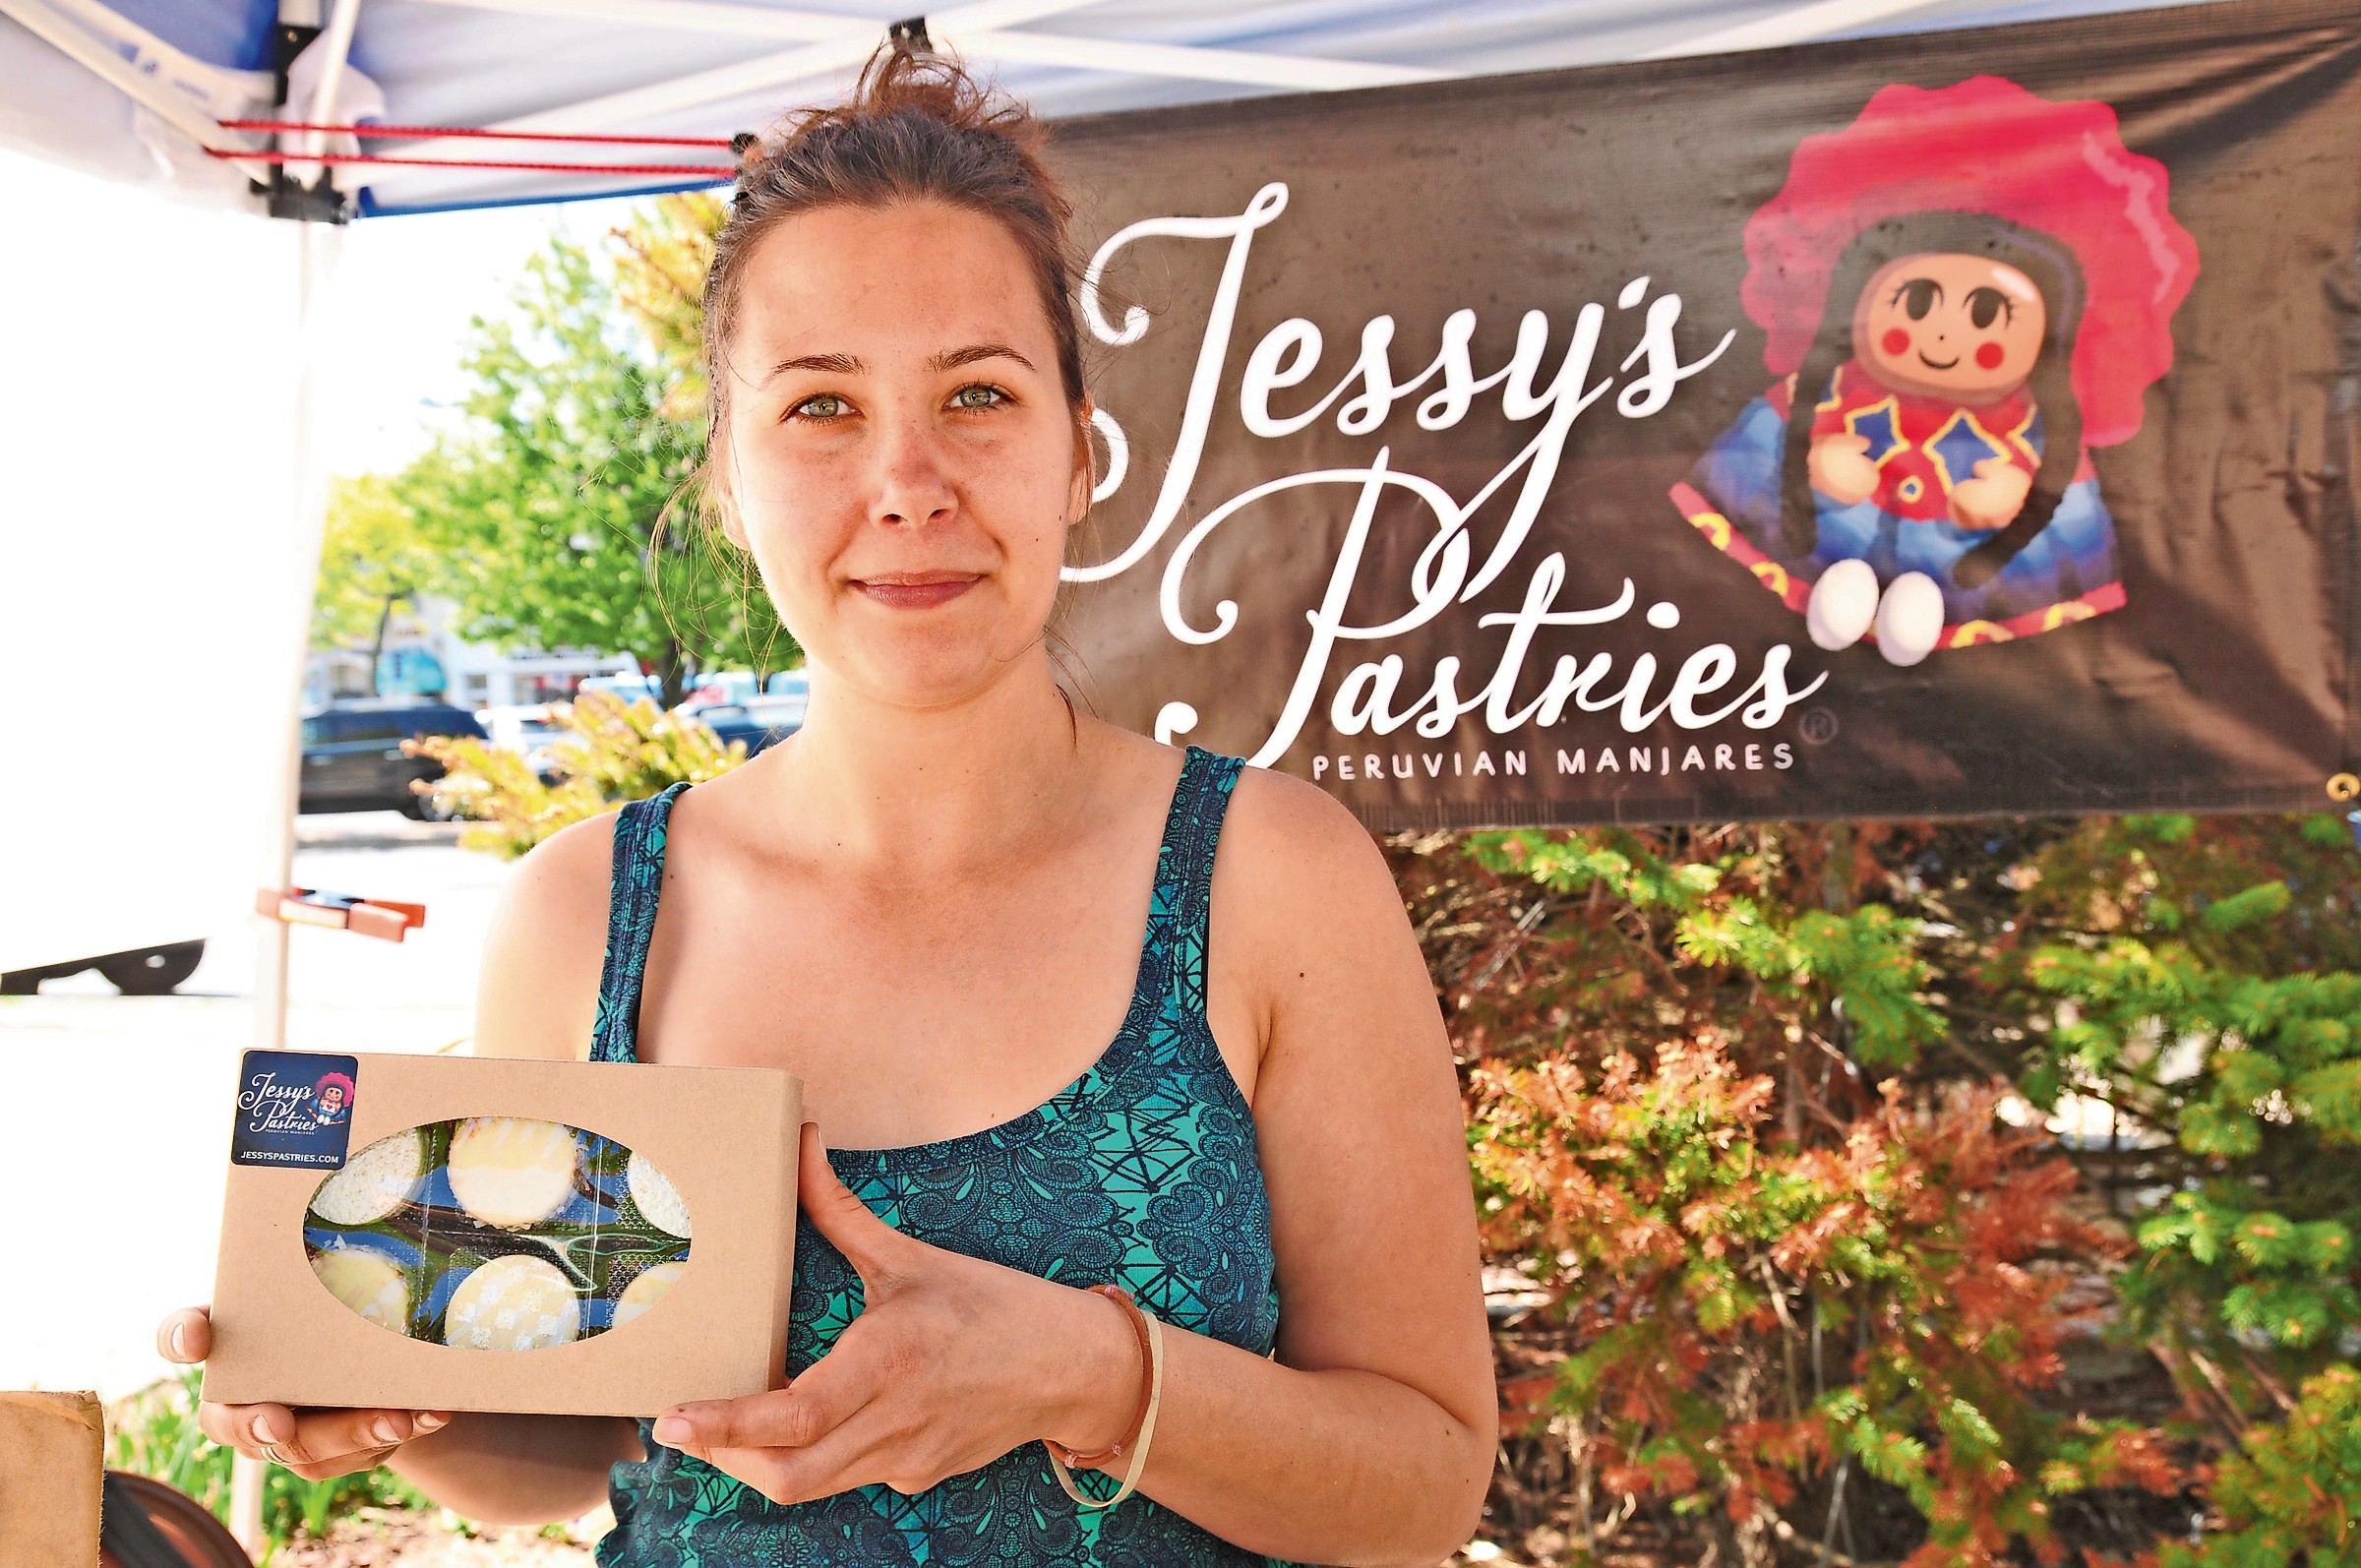 Jessy Straub at the Farmers Market in Long Beach, which runs every Wednesday and Saturday from May 27 through Nov. 12. at Kennedy Plaza.